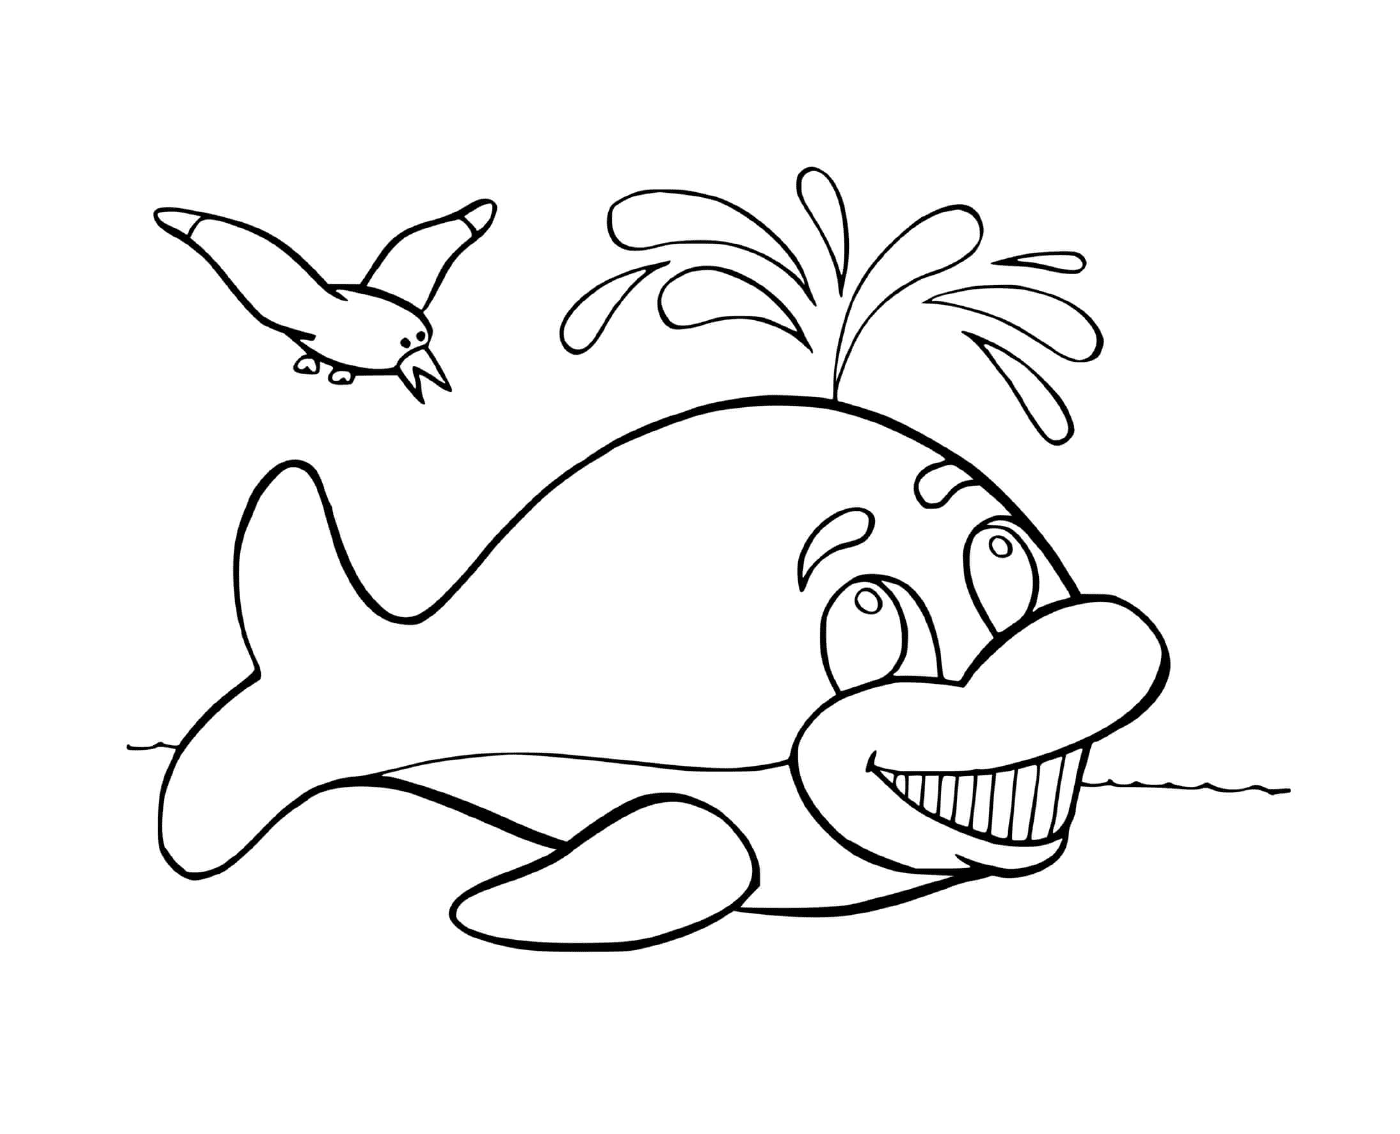  a whale and a bird 